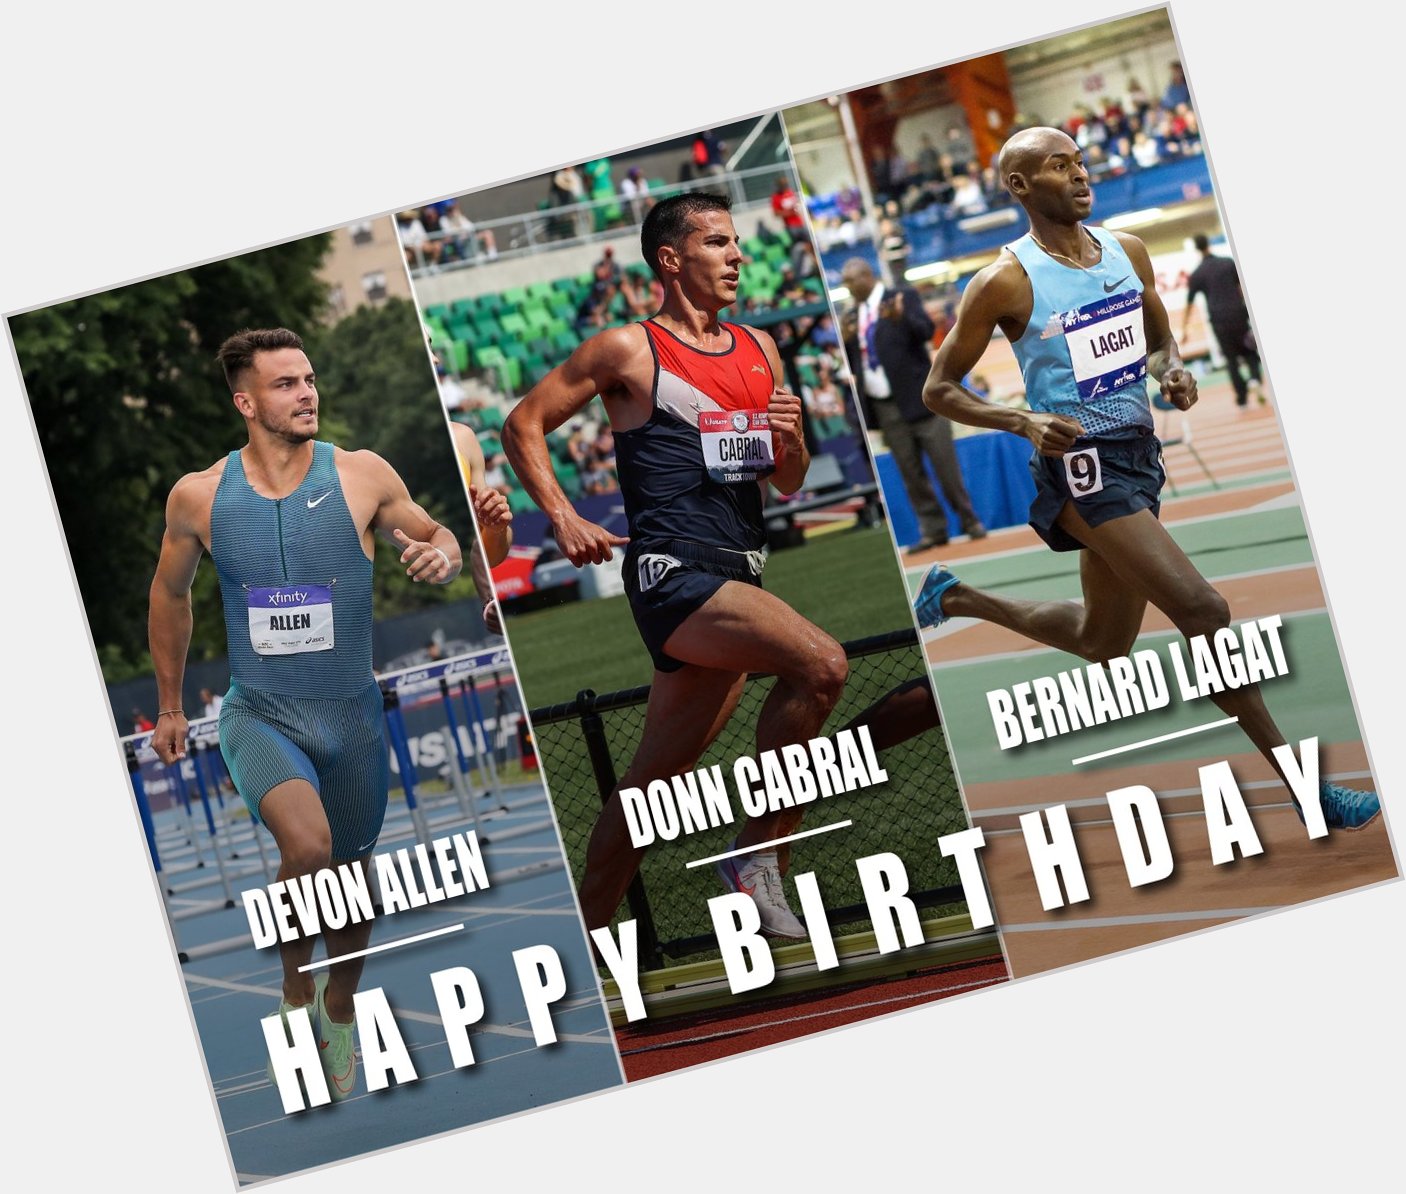 Wishing a very Happy Birthday today to Devon Allen, Donn Cabral, and Bernard Lagat! Kevin Morris 